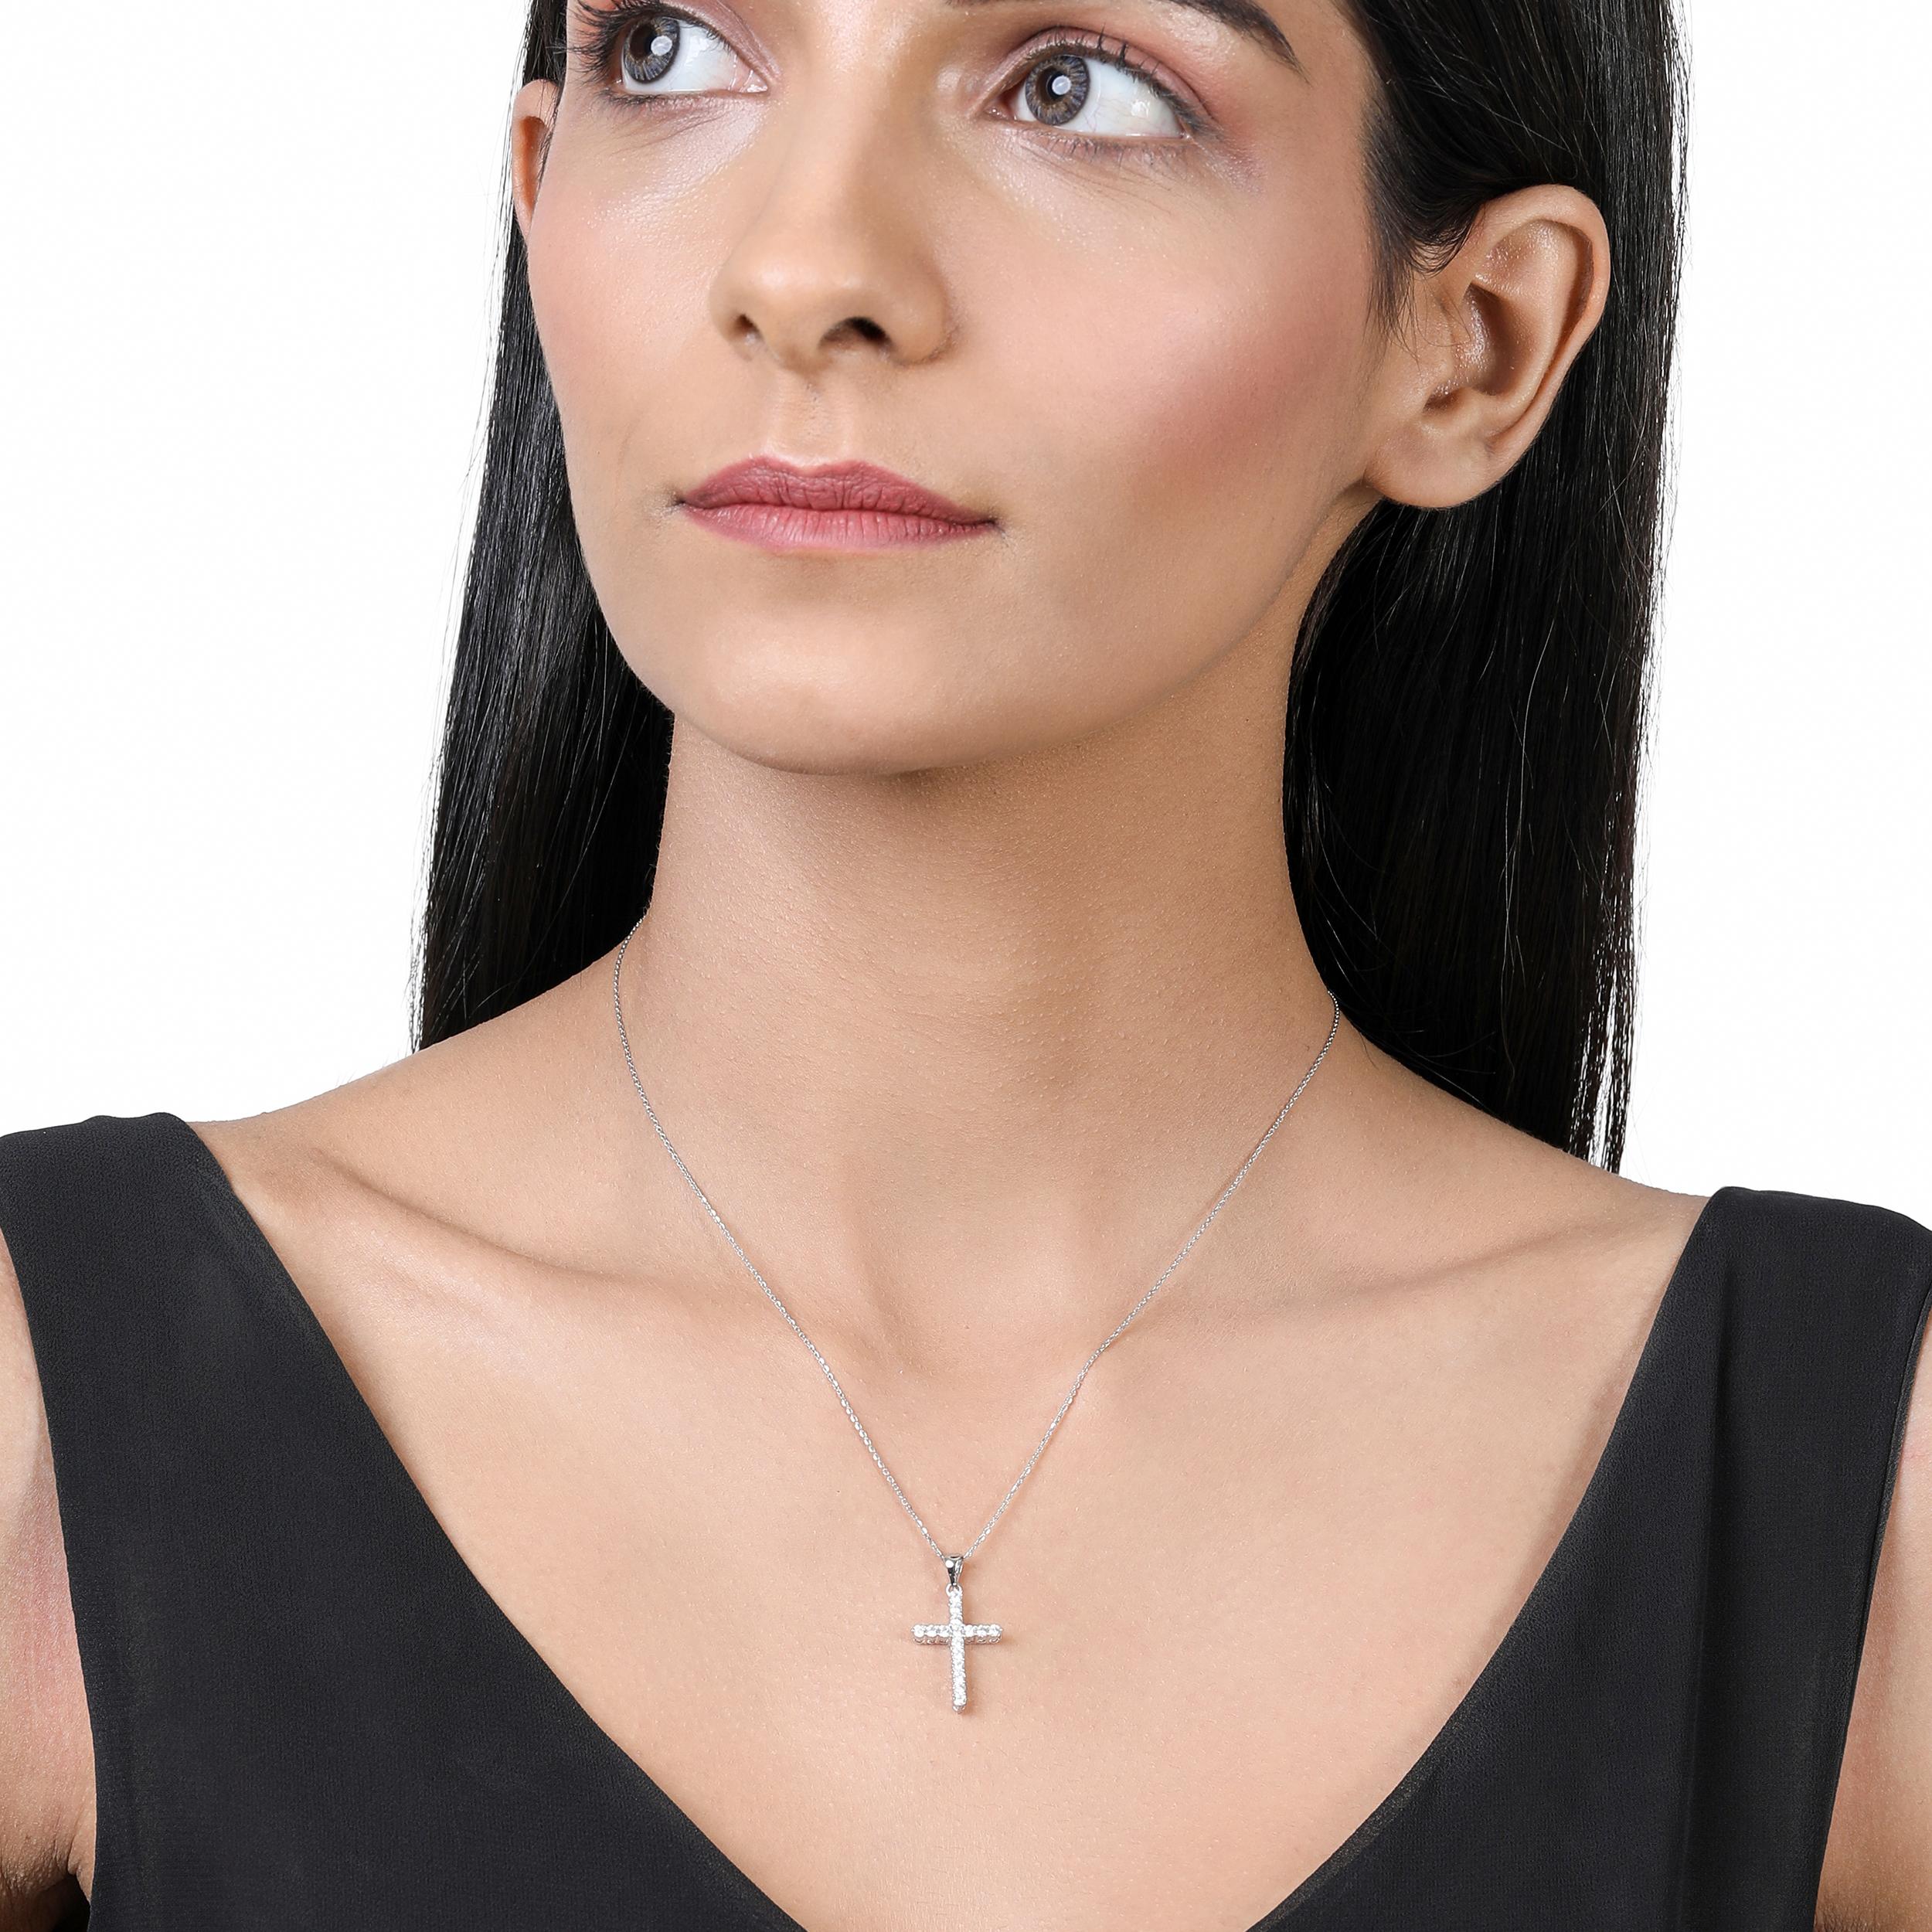 THIS STYLE DOES NOT INCLUDE A CHAIN. Crafted in 1.79 grams of 14K White Gold, the pendant contains 16 stones of Round Diamonds with a total of 0.46 carat in G-H color and SI carat.

CONTEMPORARY AND TIMELESS ESSENCE: Crafted in 14-karat/18-karat